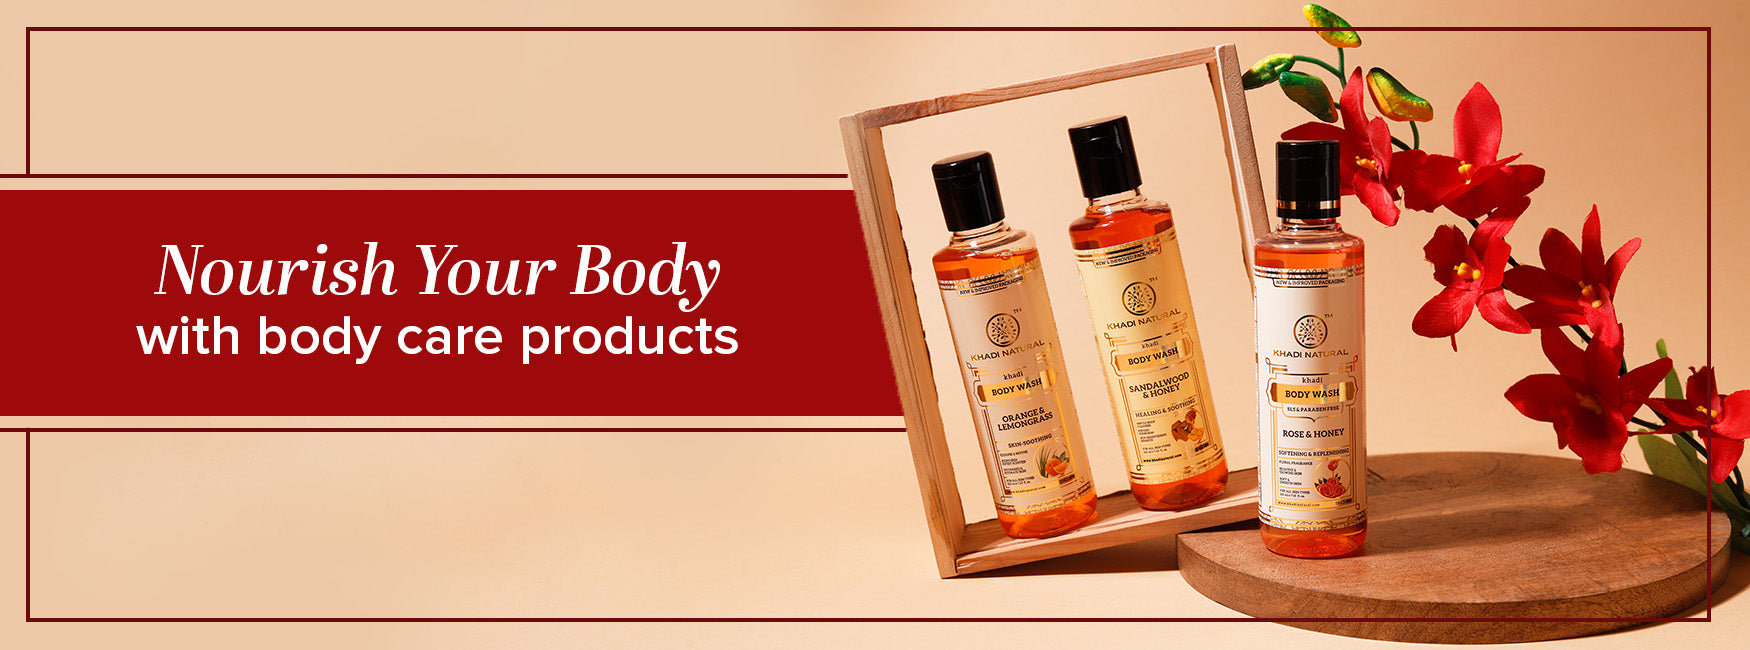 Buy body care products online India for radiant skin